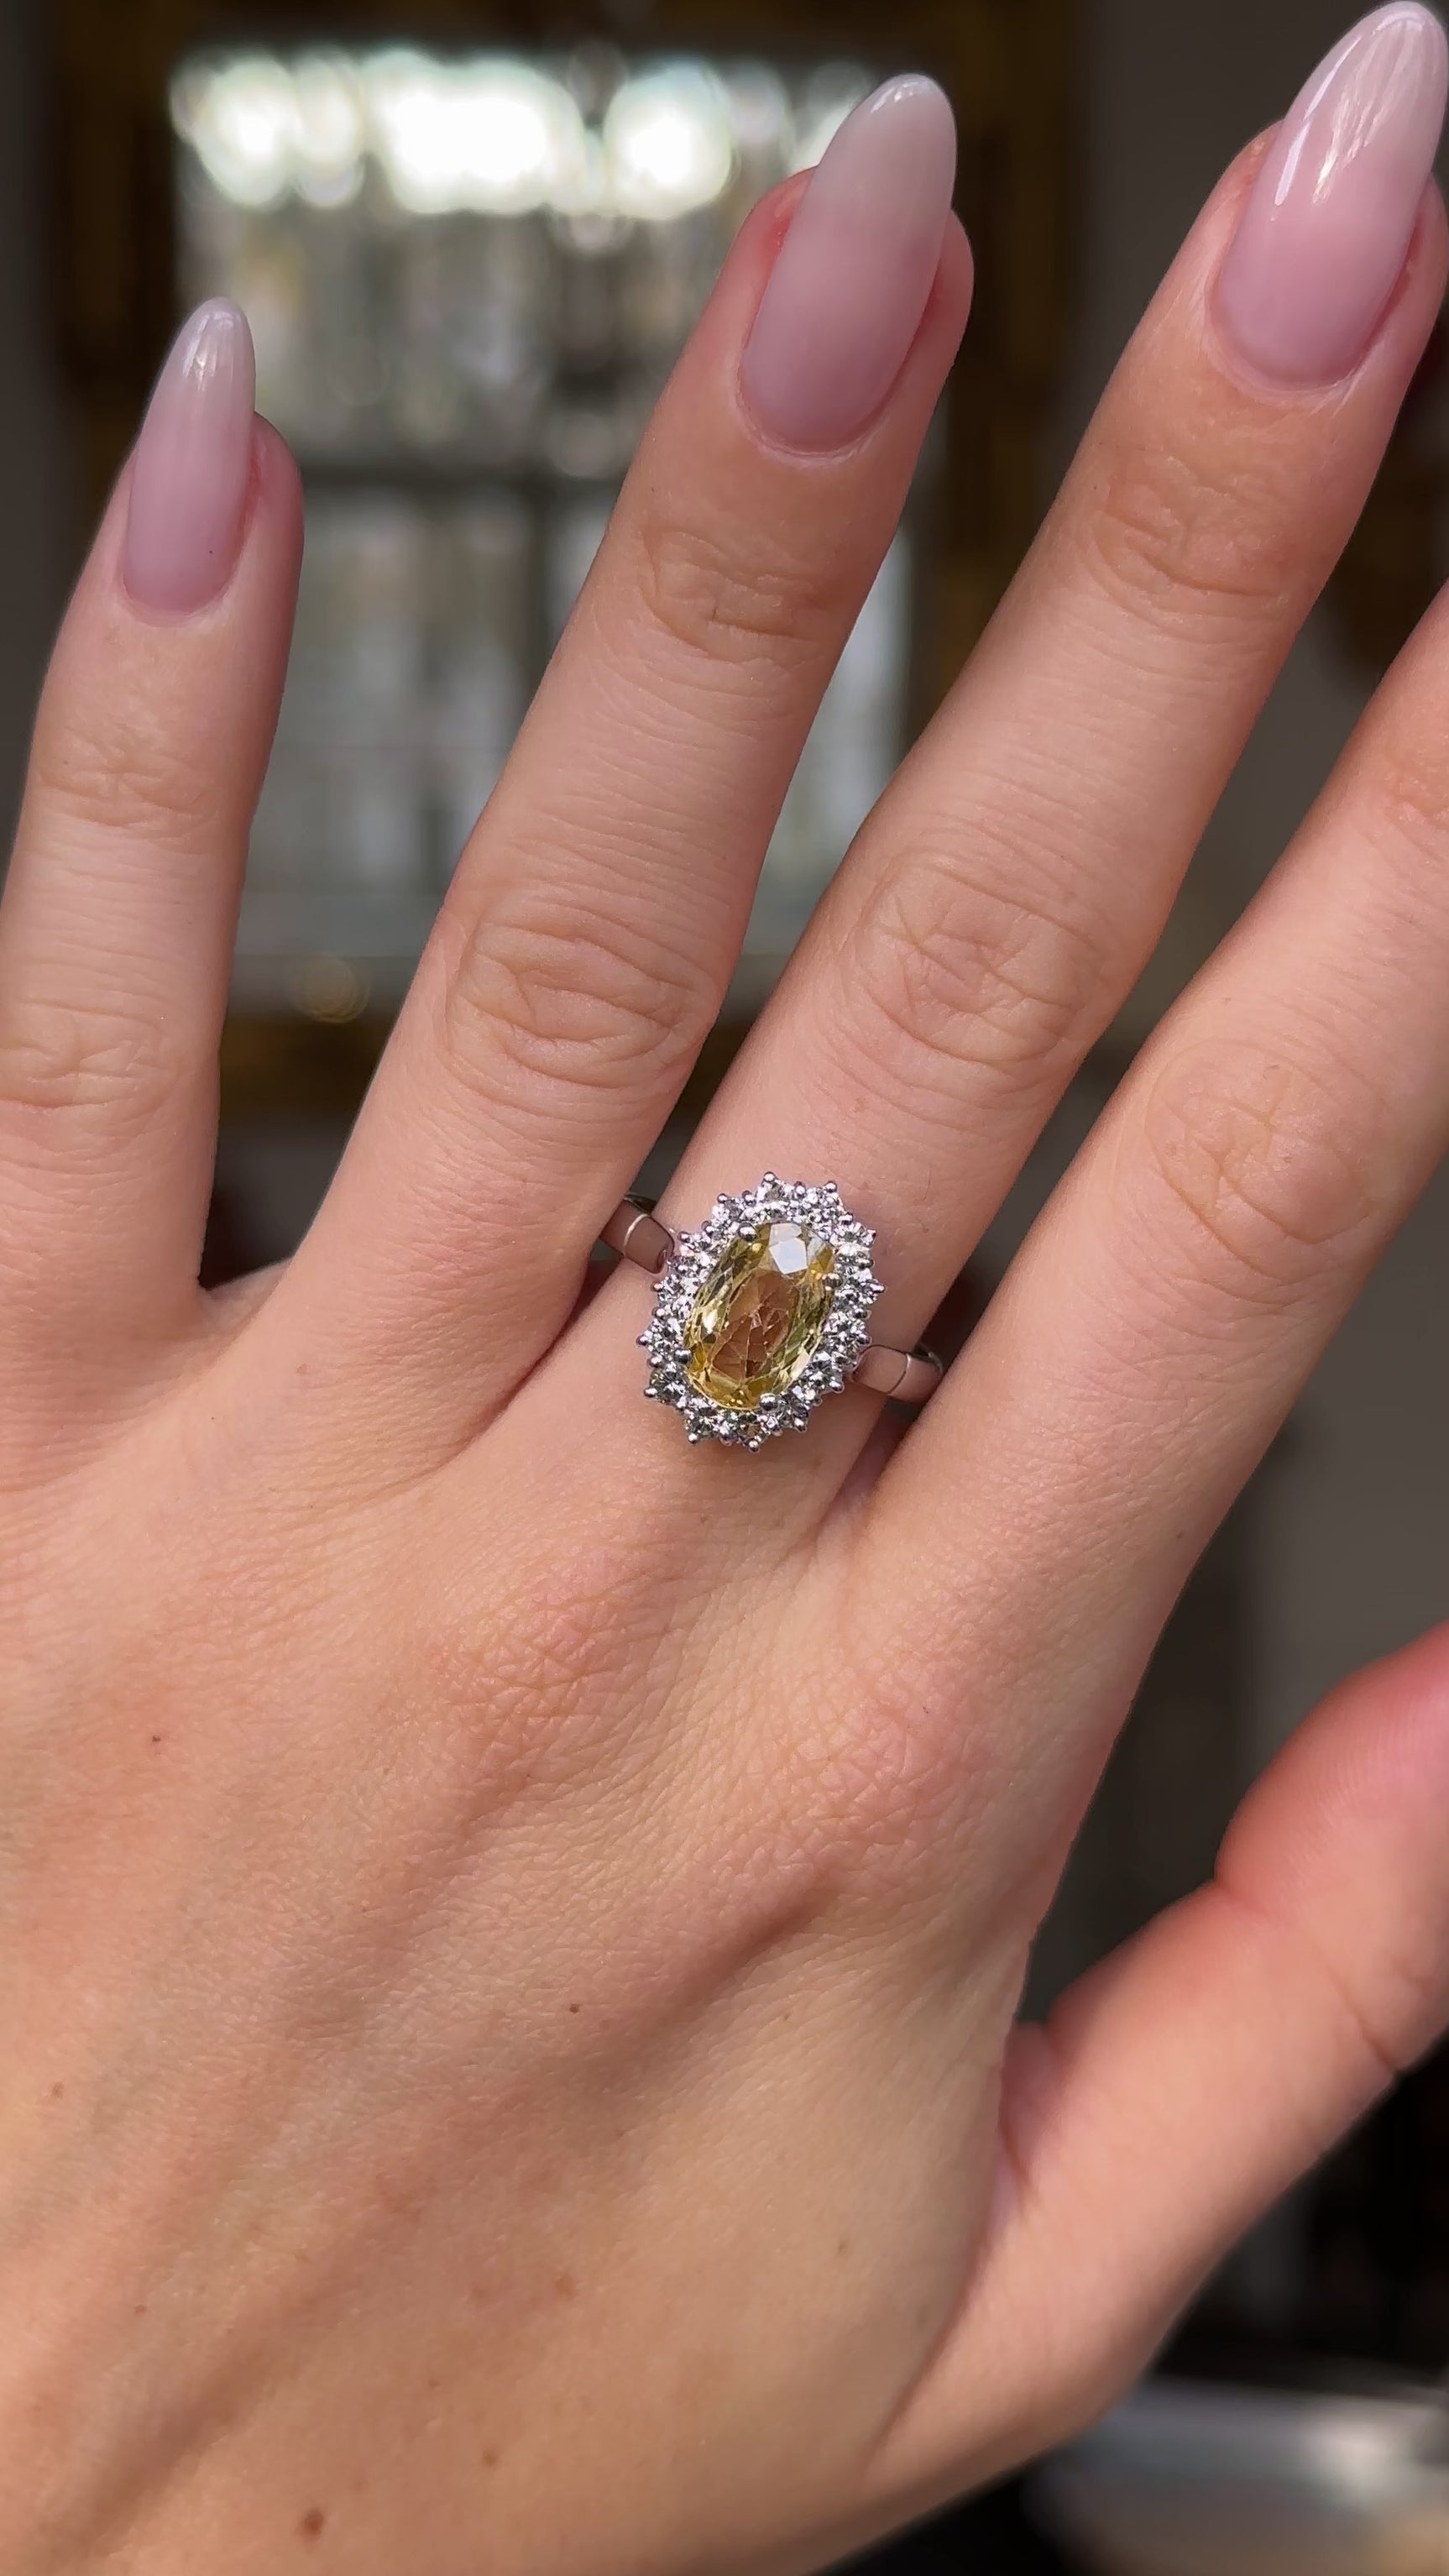 Yellow sapphire and diamond cluster engagement ring, worn on hand and rotated to give perspective.